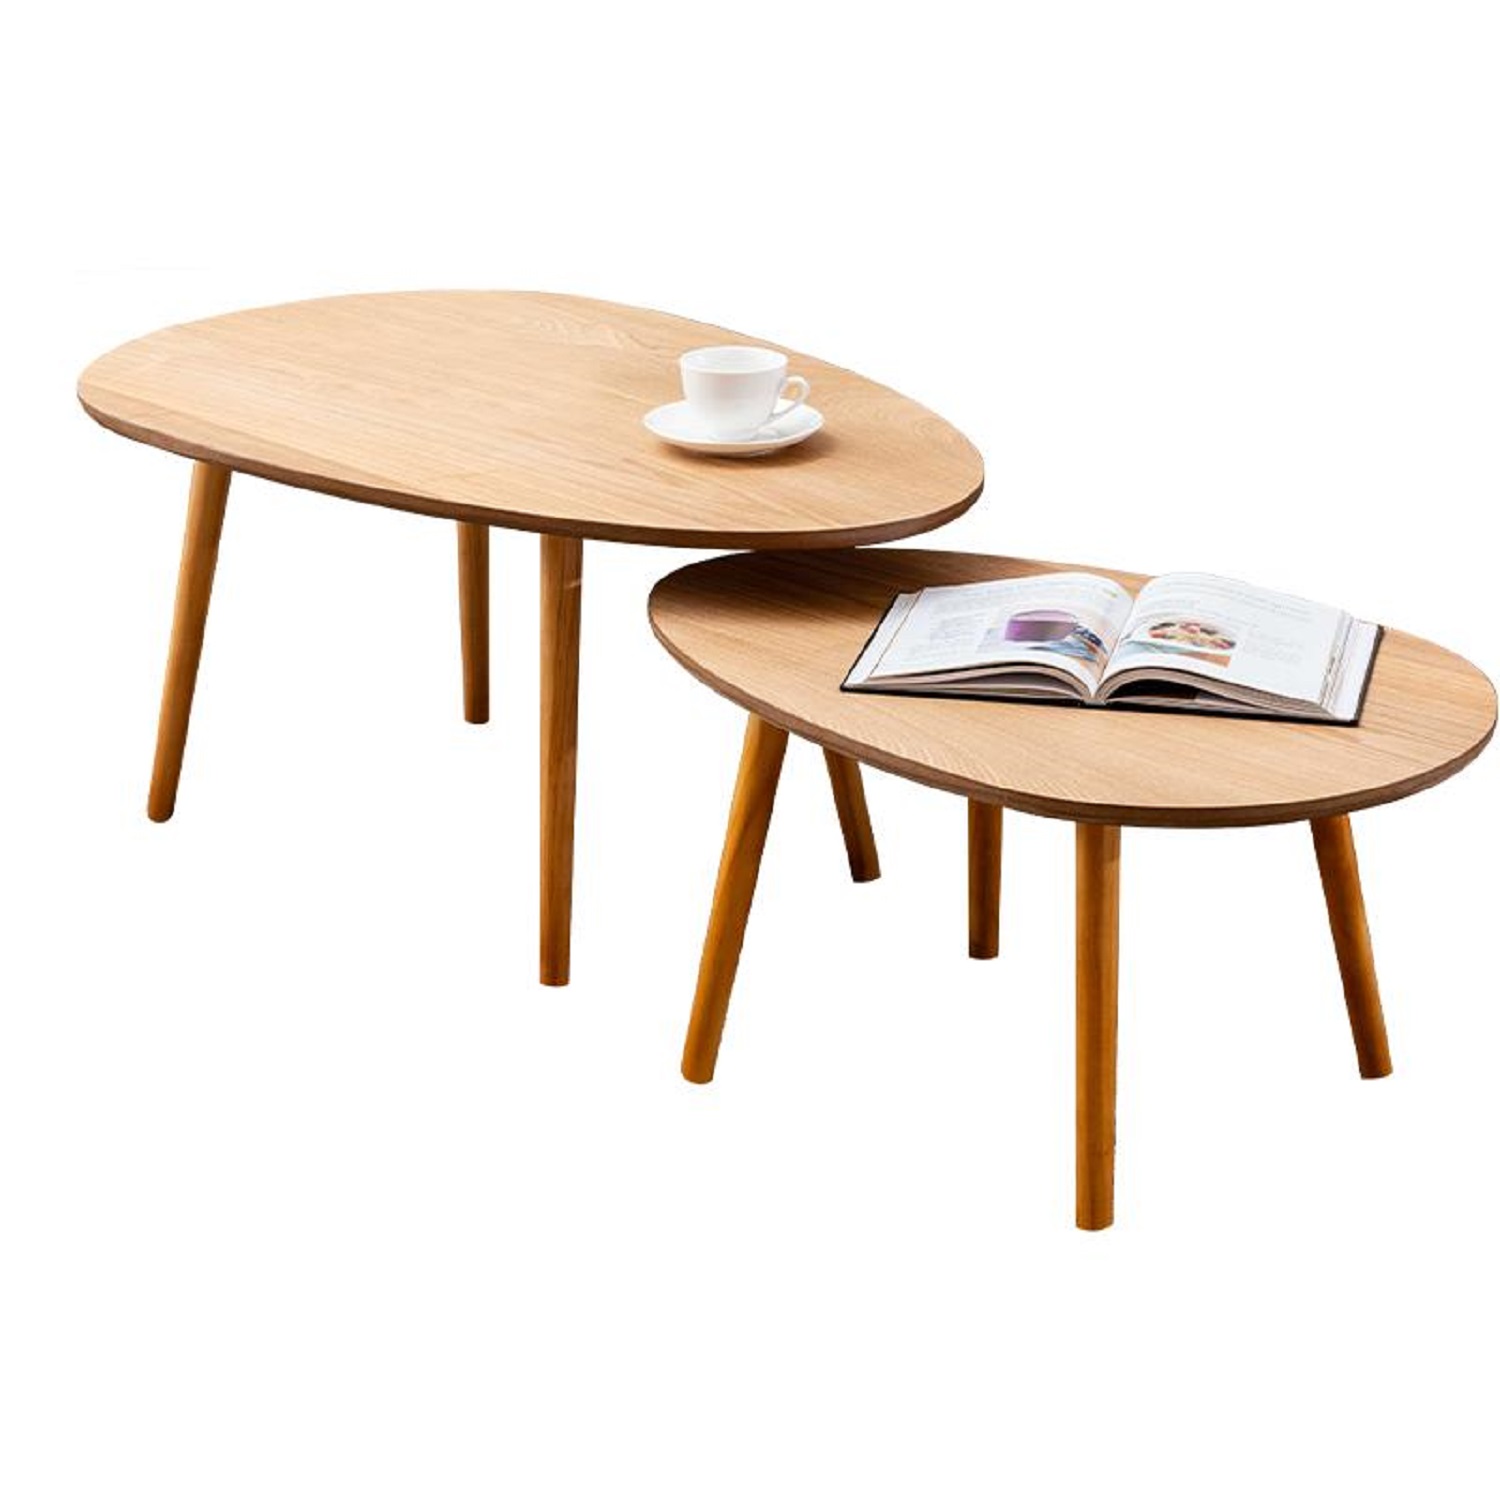 Set of 2 Coffee Table Nesting Table